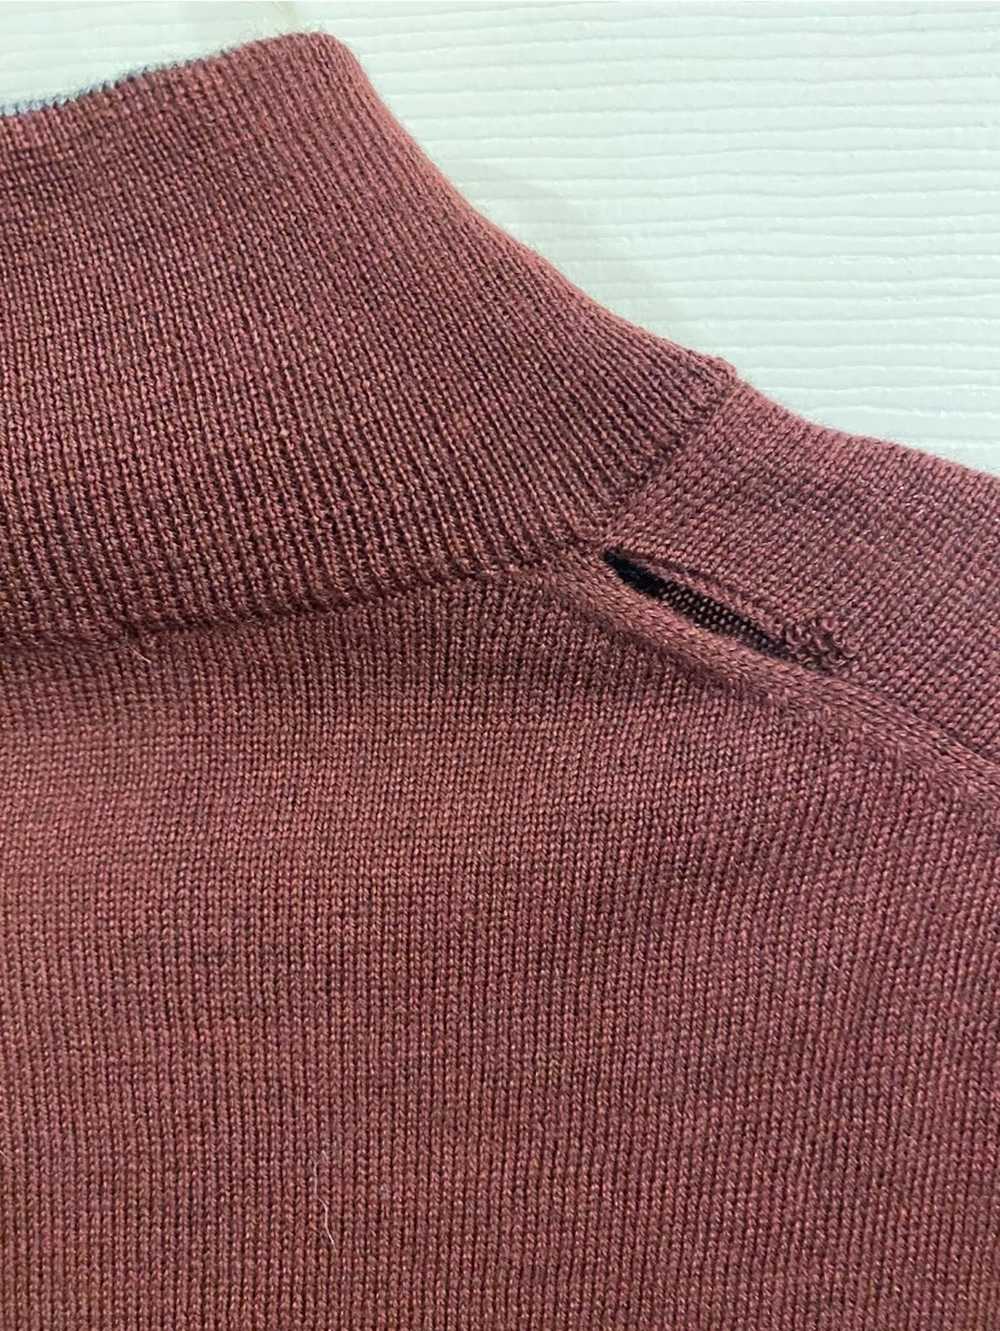 Other Raffi Sweater Mens Extra Large Maroon 100% … - image 3